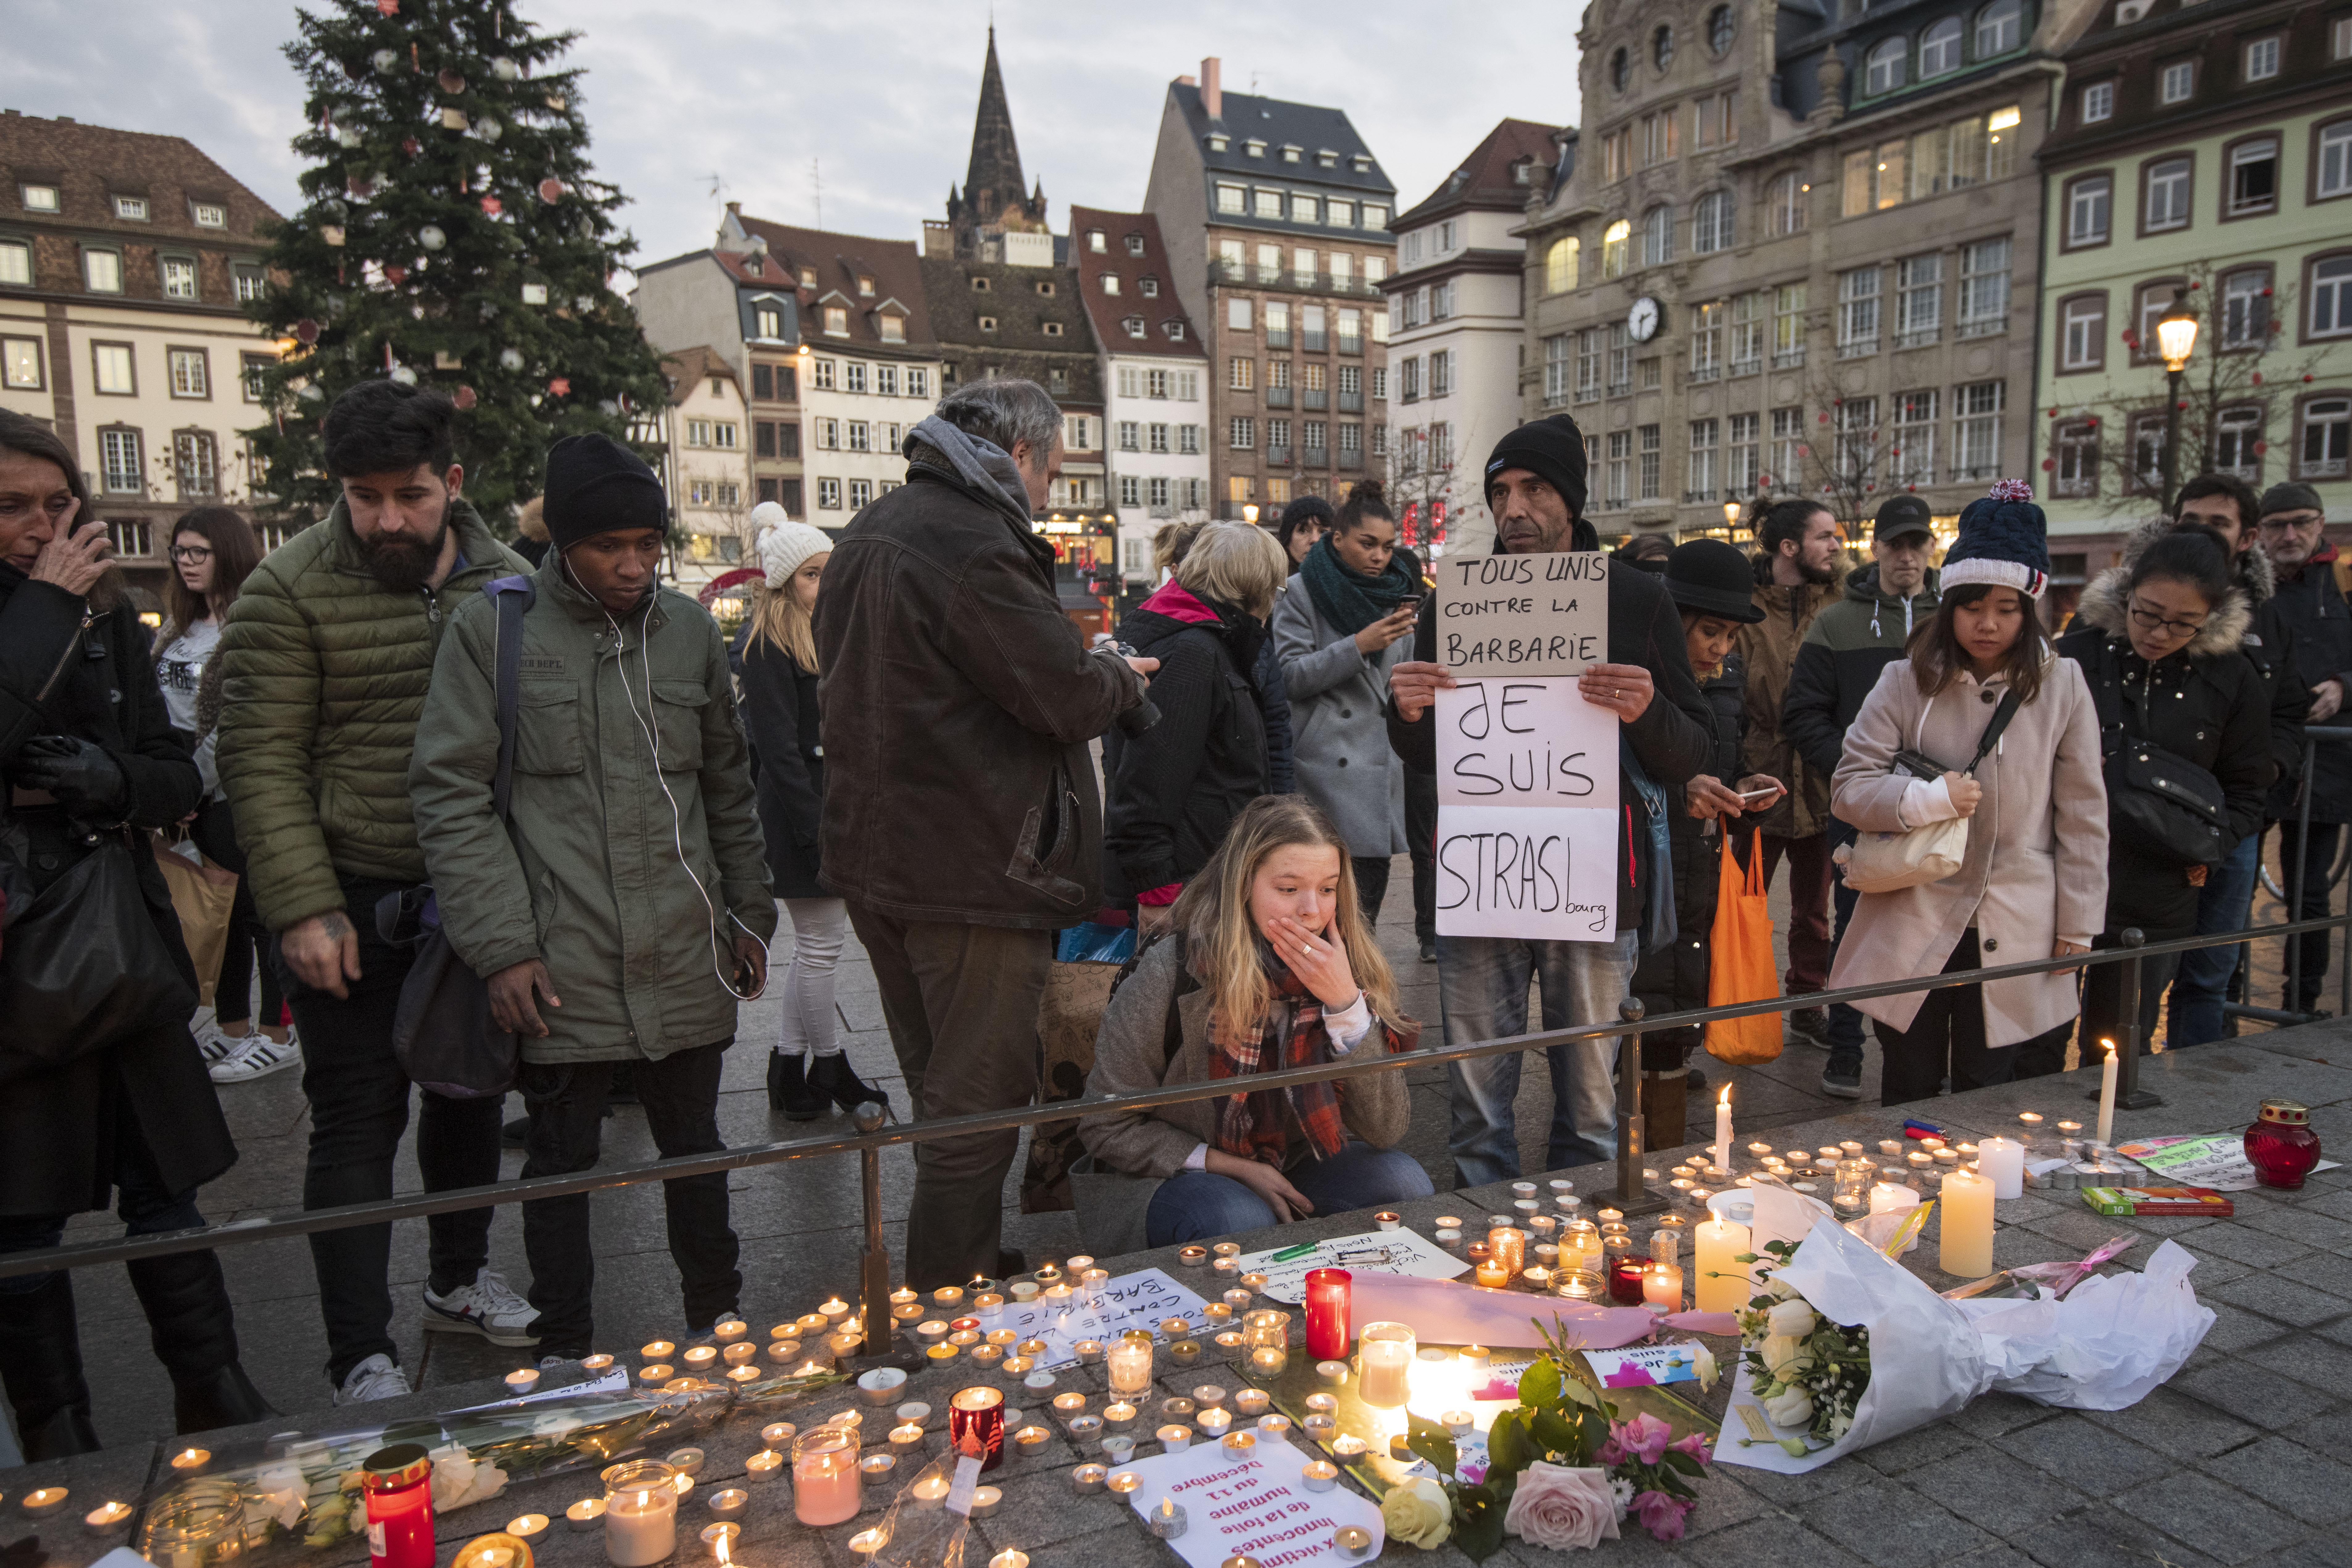 Mourners leave candles in a square in Strasbourg.